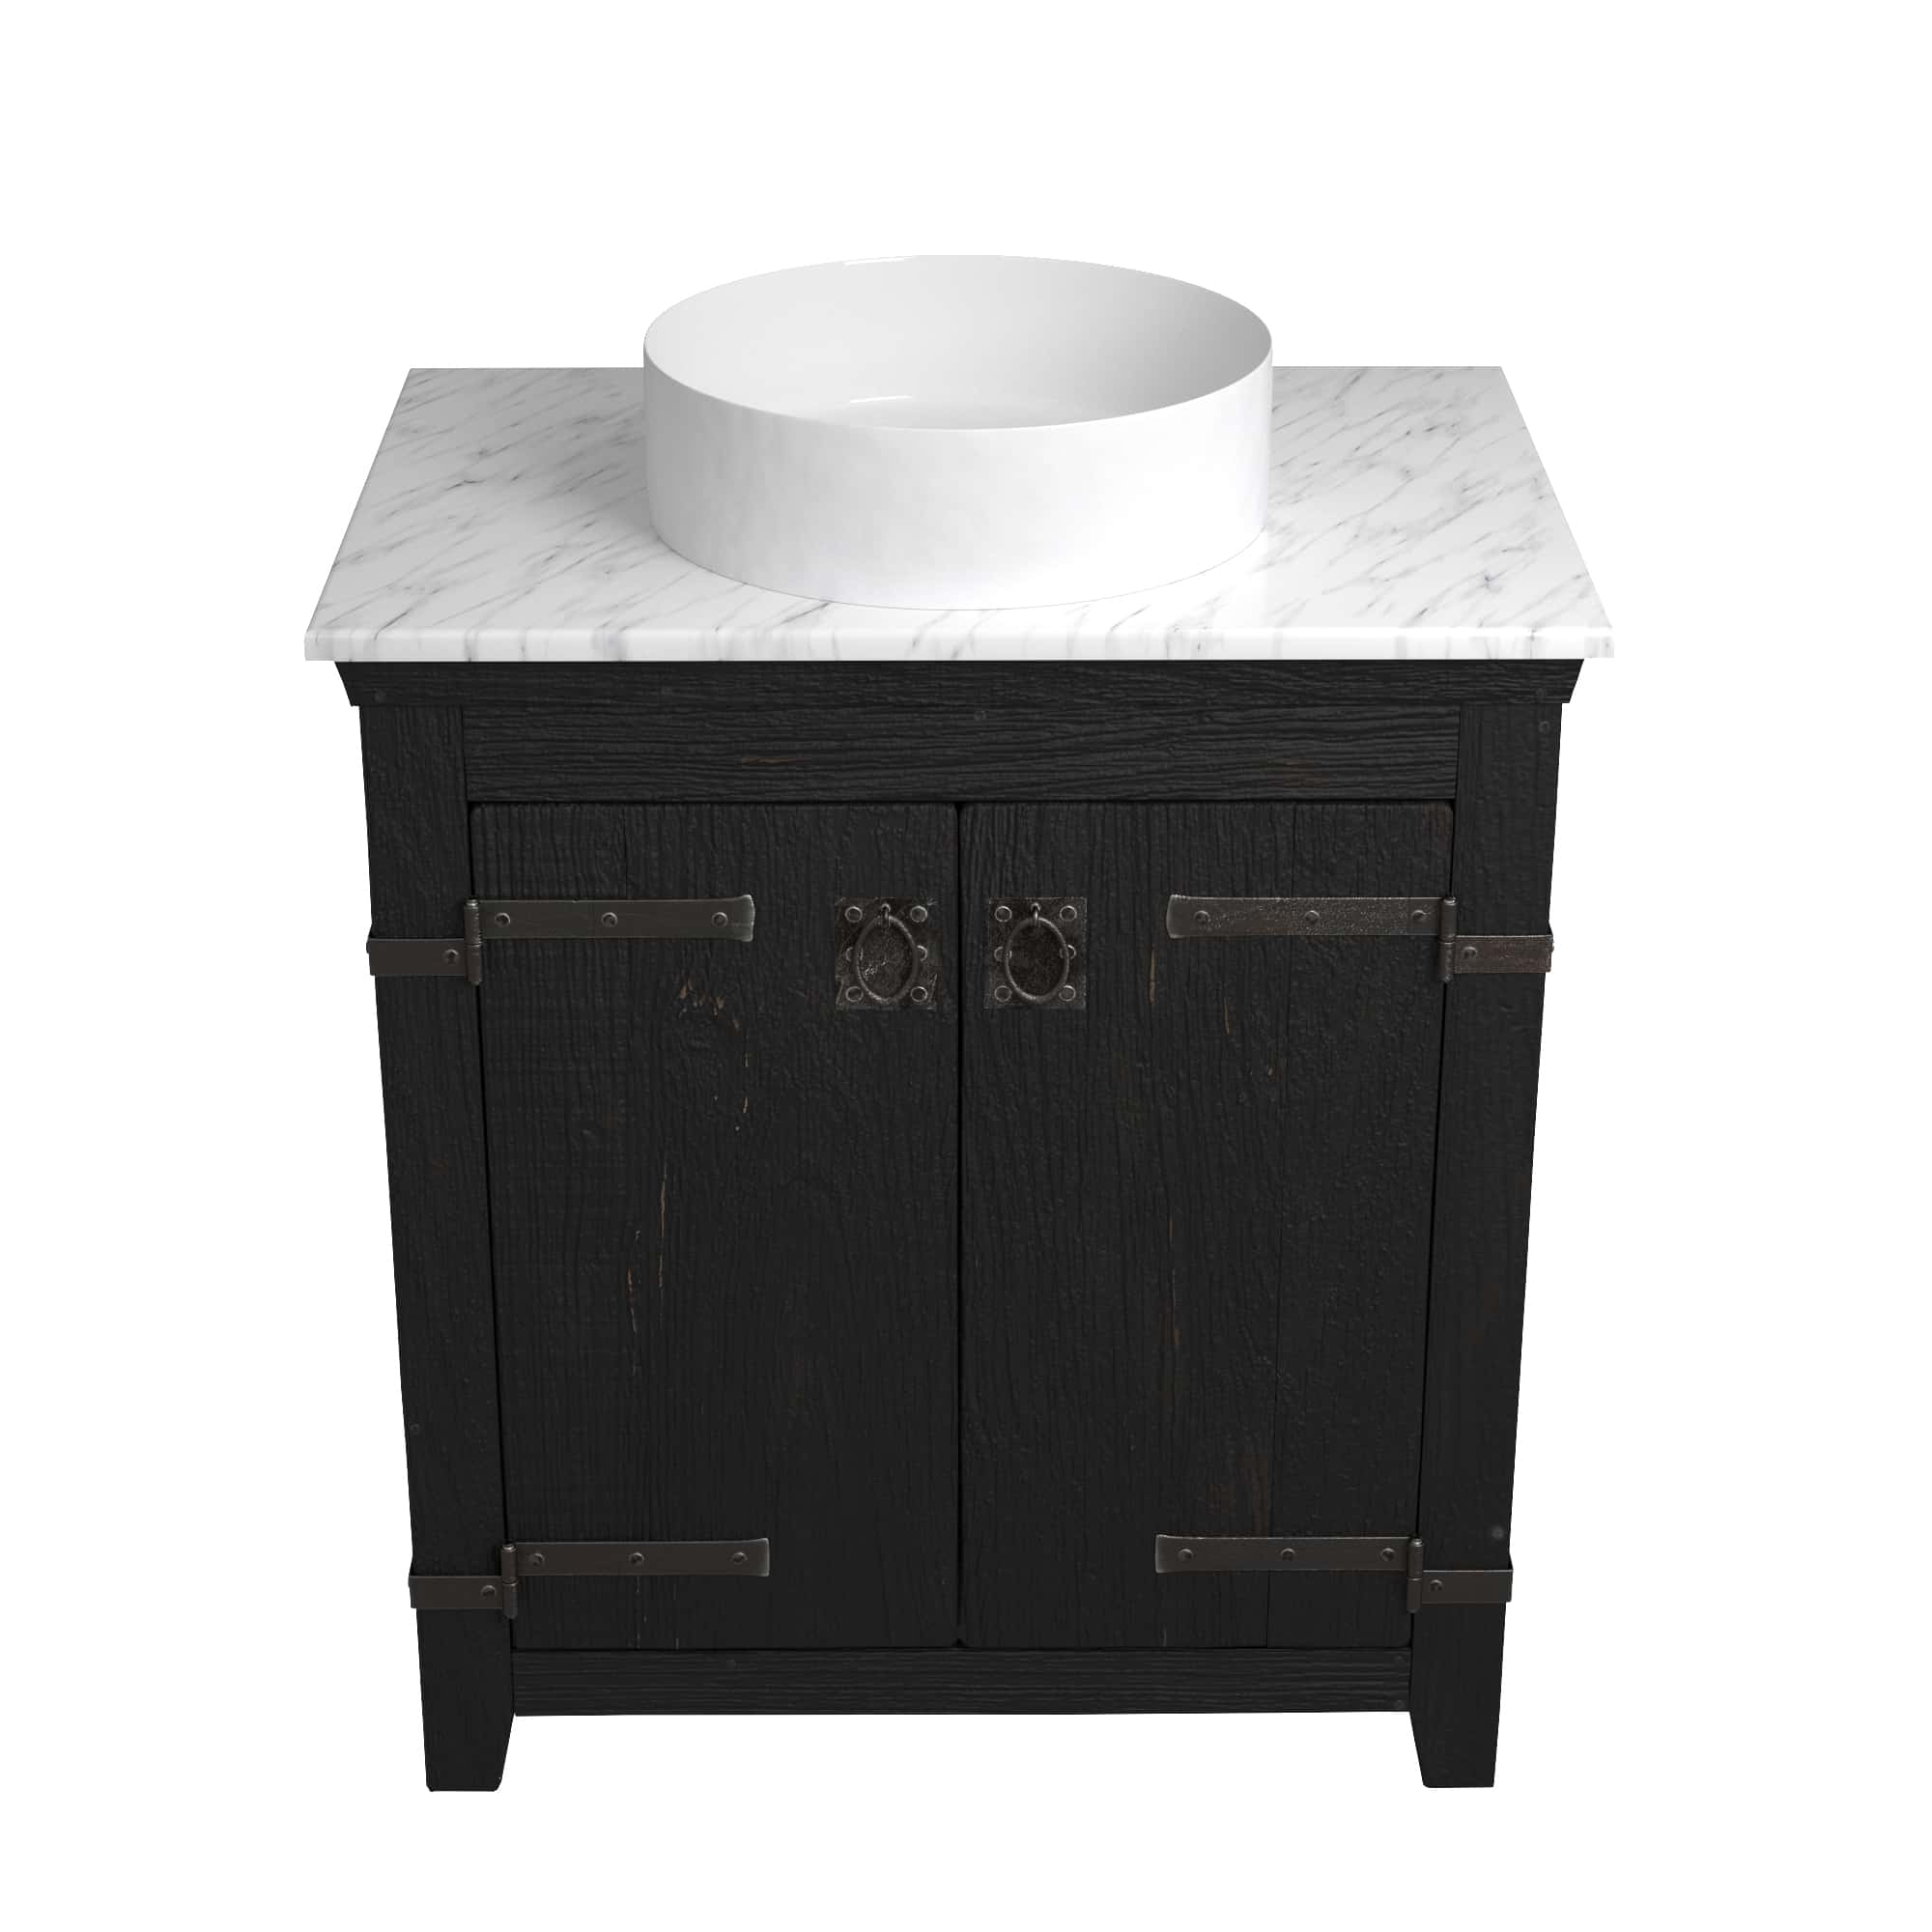 Native Trails 30" Americana Vanity in Anvil with Carrara Marble Top and Positano in Bianco, No Faucet Hole, BND30-VB-CT-MG-054